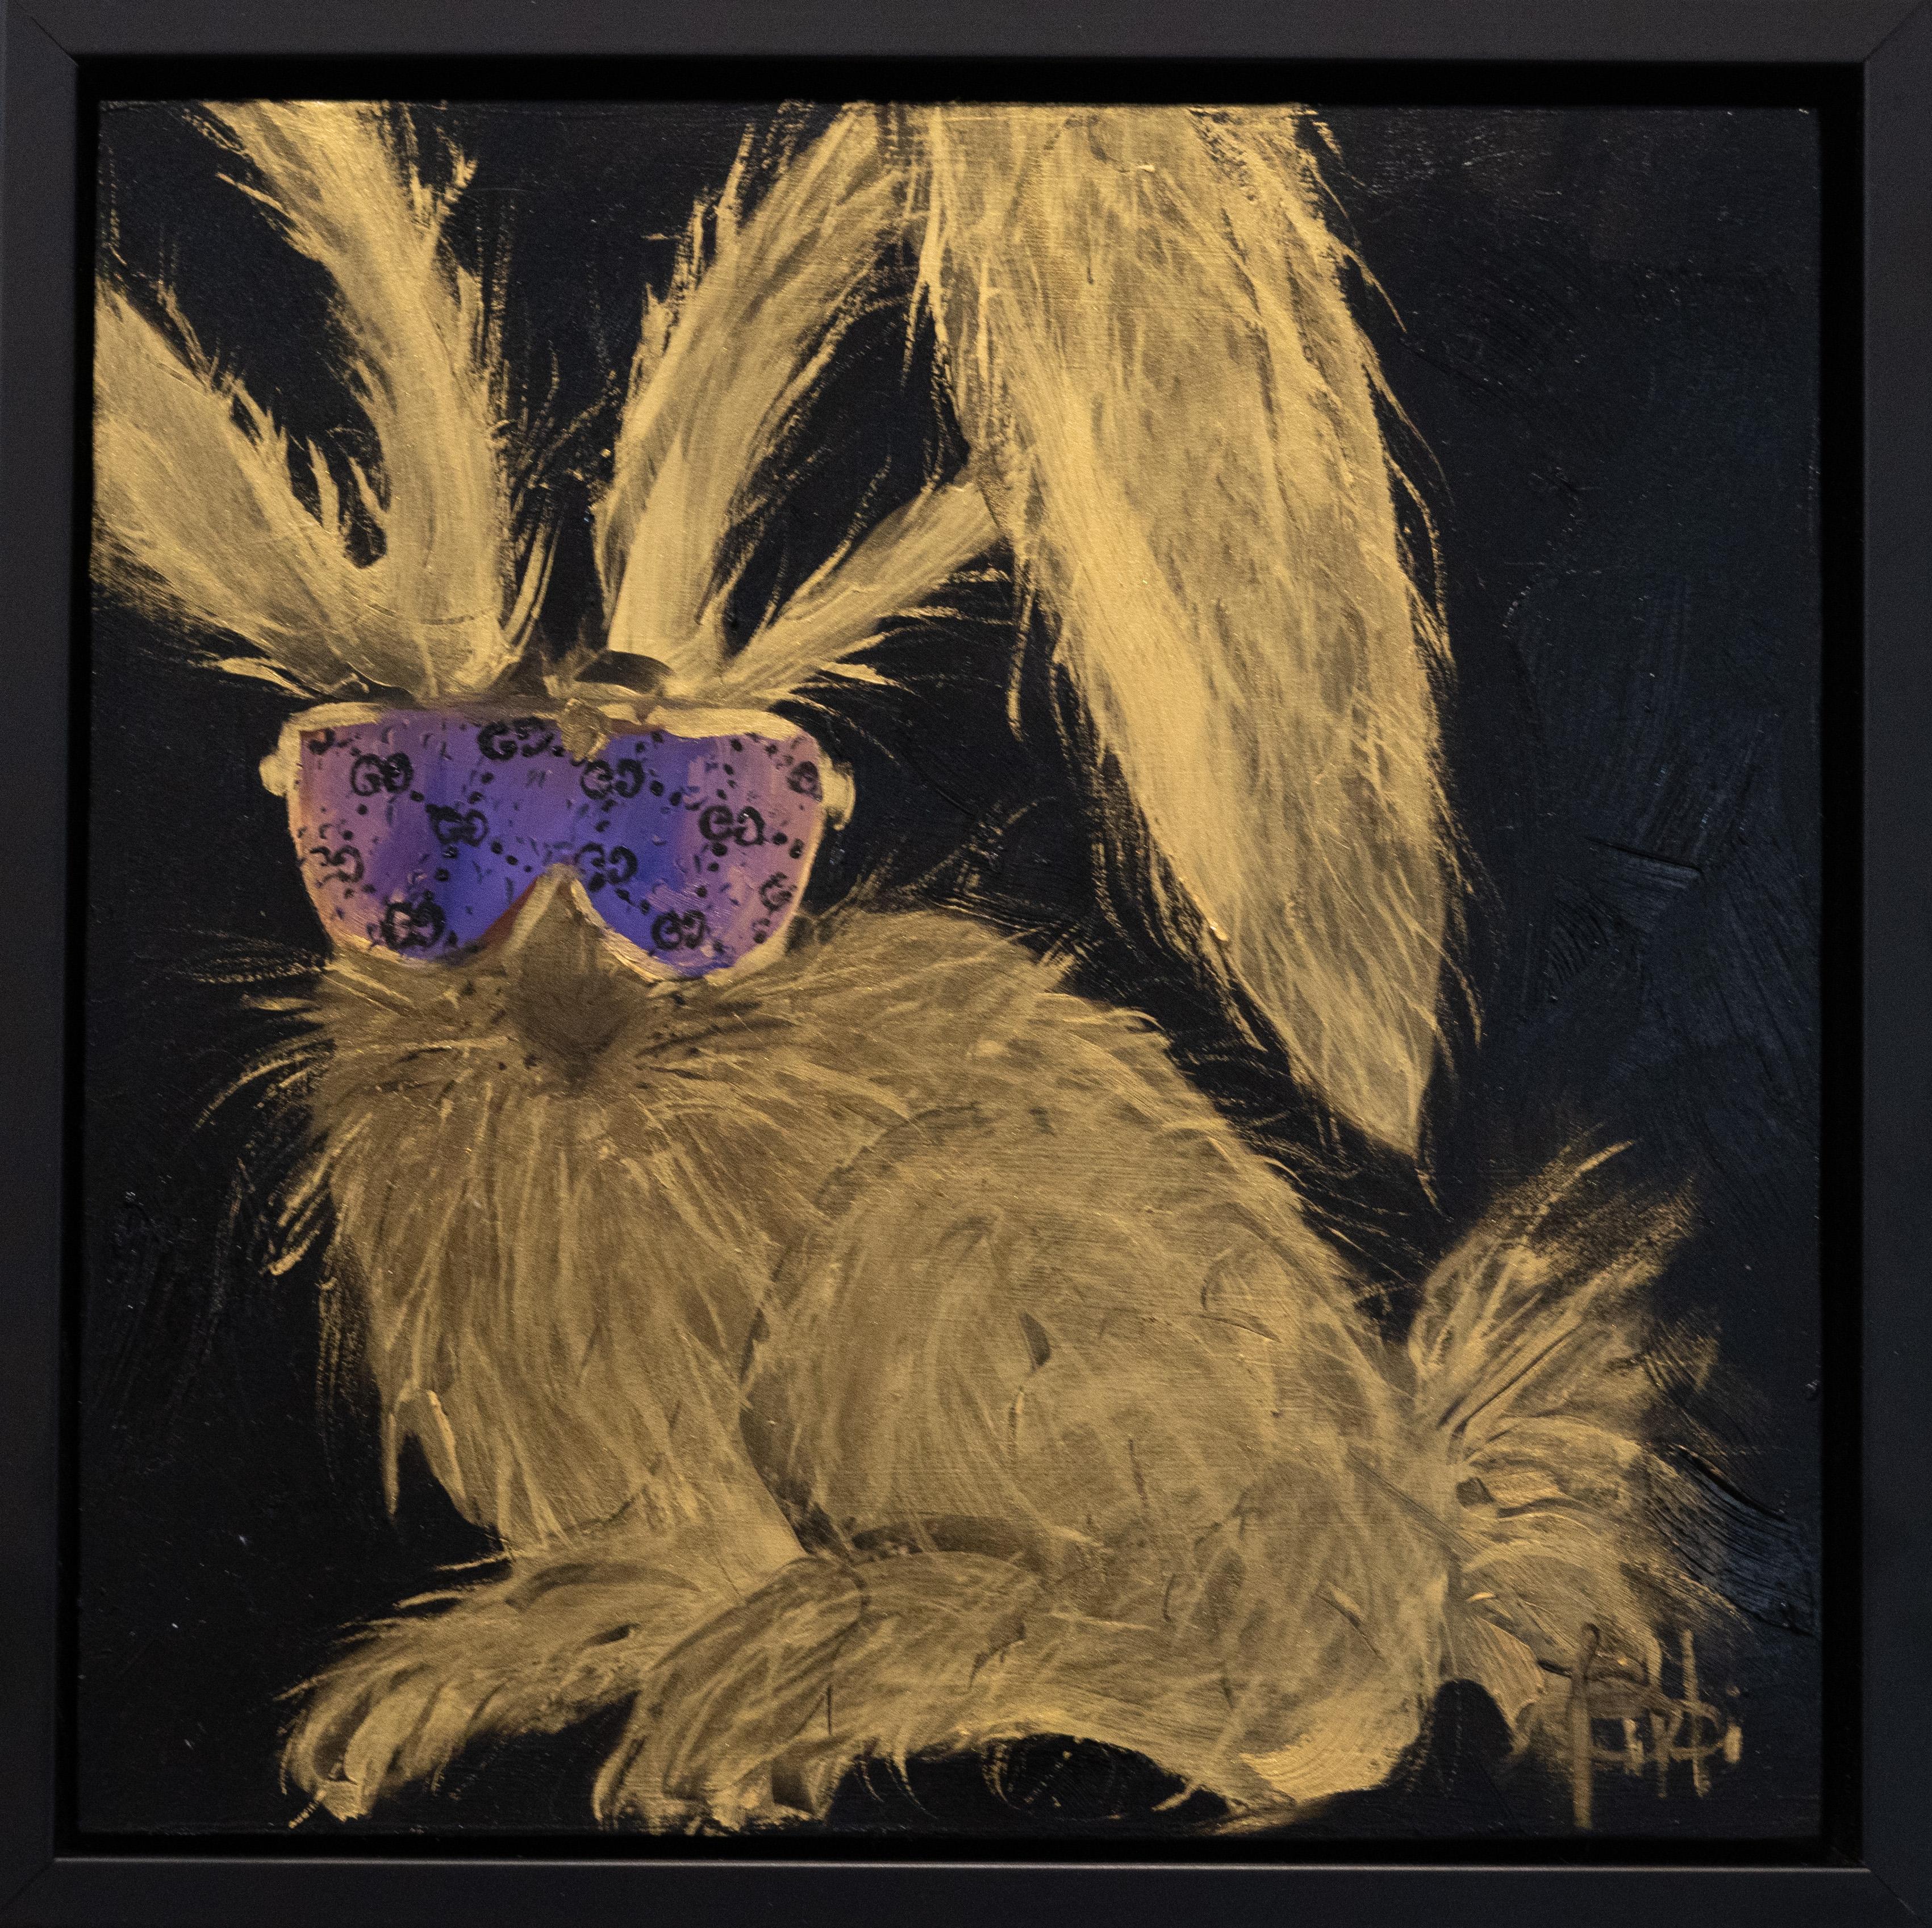 Golden Hares in Ray Ban Sunglasses  10x10  Contemporary  Framed  Free Shipping 2